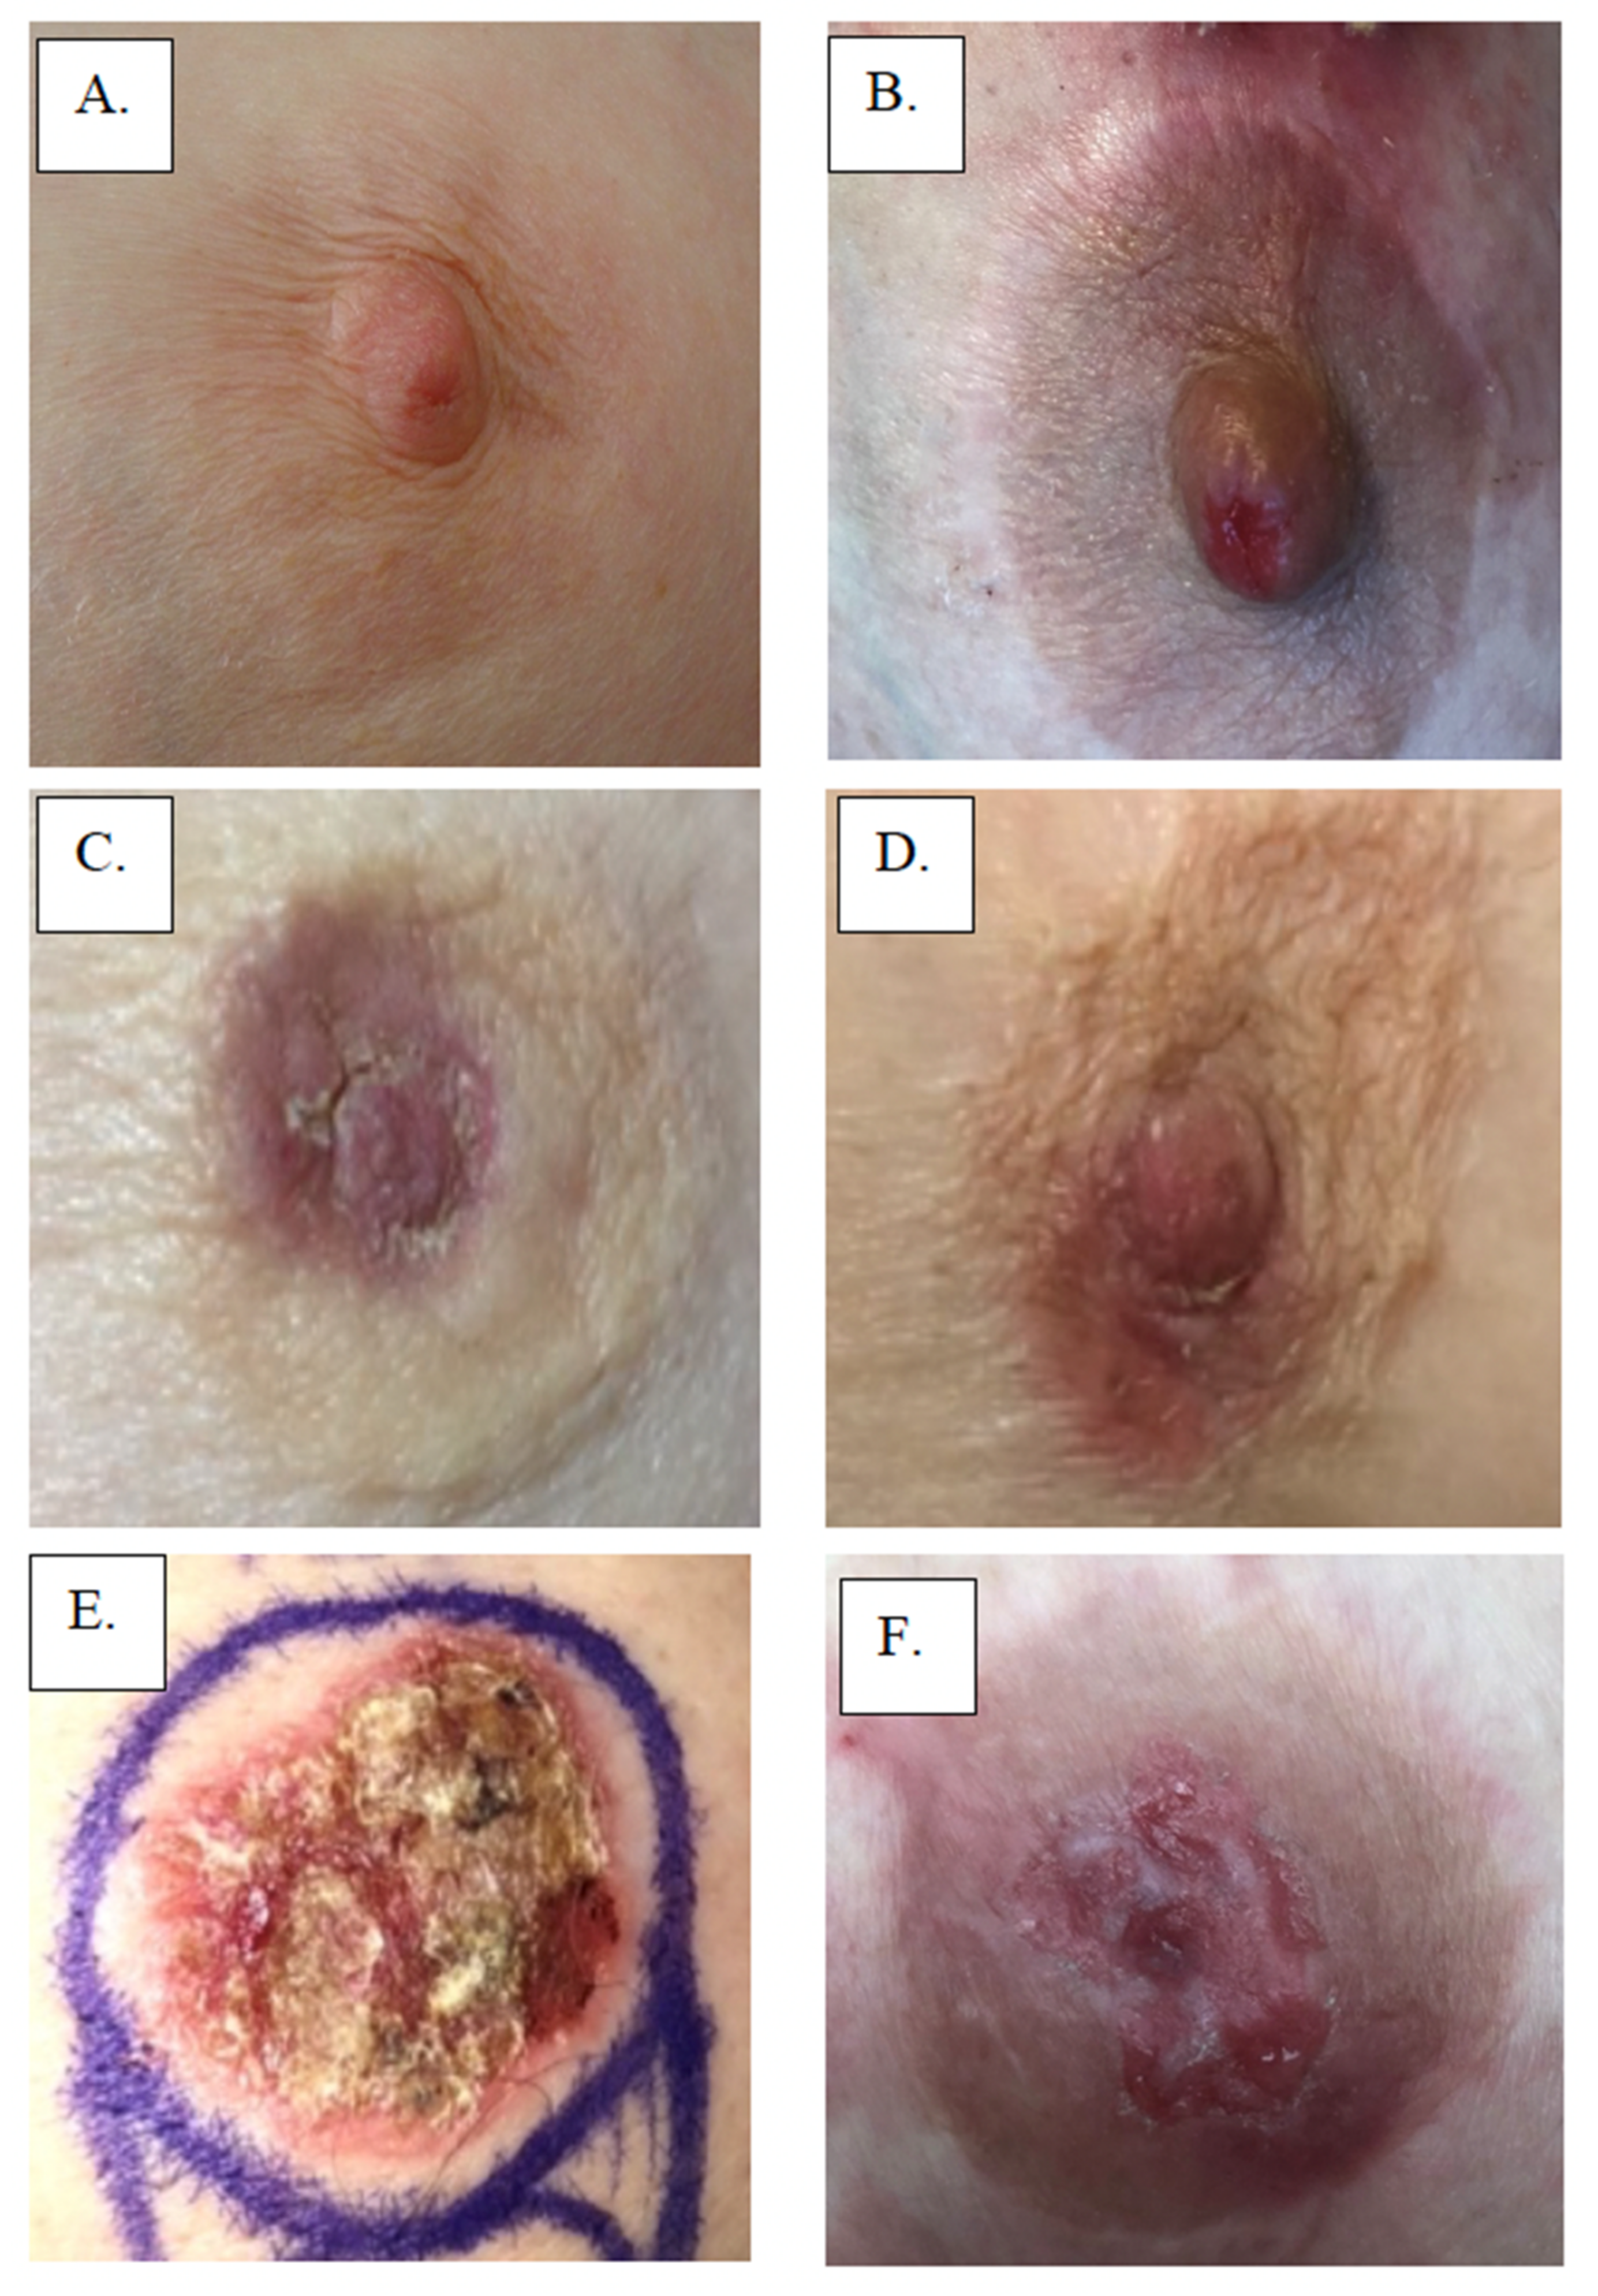 A -Preoperative examination showing evident breast size asymmetry; B